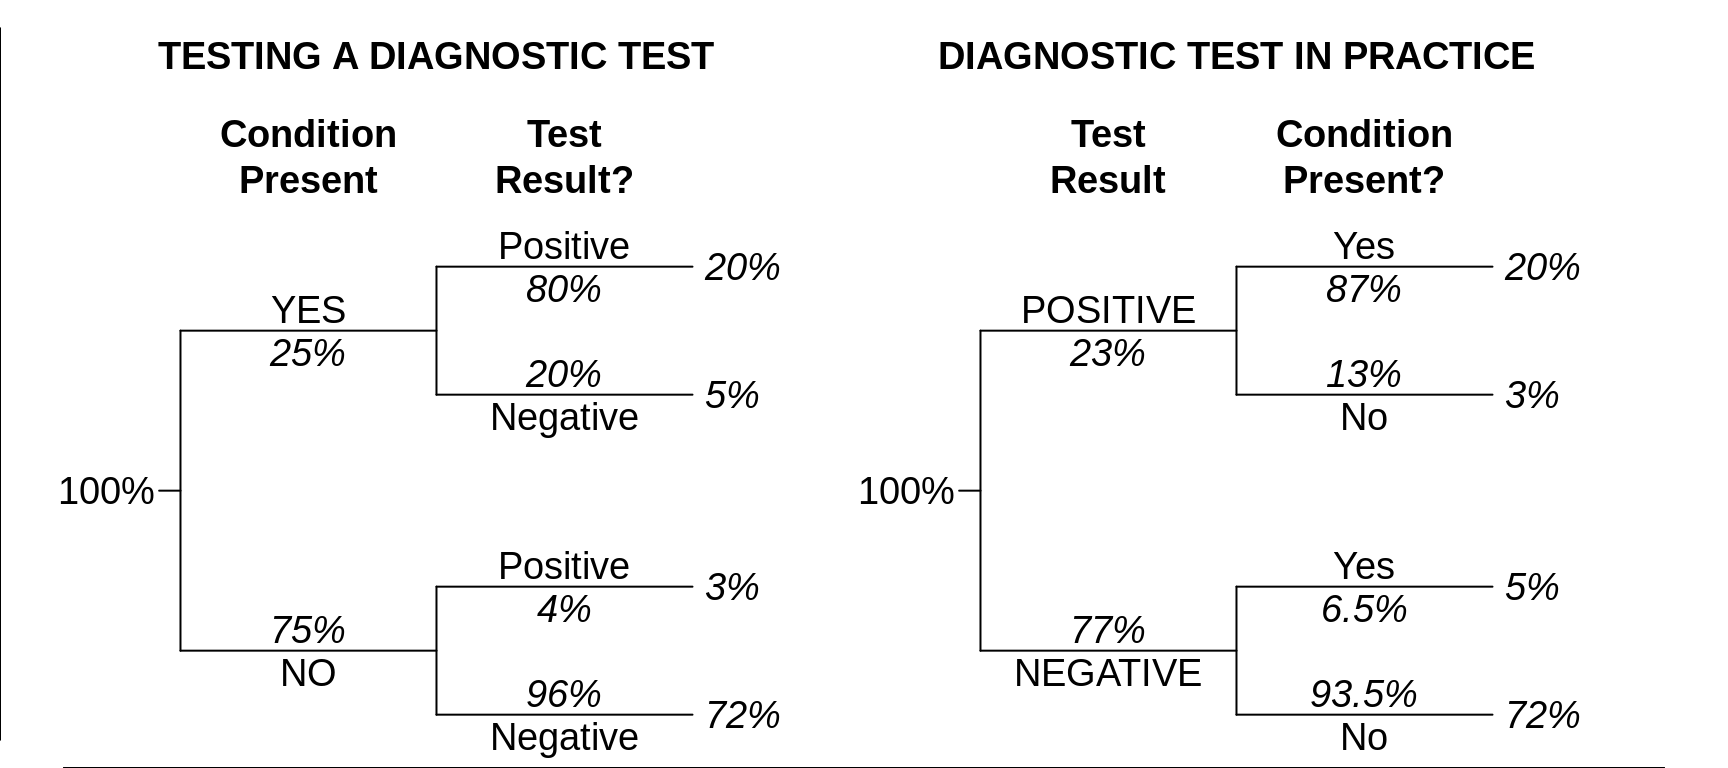 A first example of  **two very different sets of probabilities**: LEFT The probabilities that a potential diagnostic test would be positive in persons who, respectively, do and do not have the medical condition of concern. RIGHT The probabilities that a medical condition of concern is present in persons whose diagnostic test is, respectively, positive and negative. **It is assumed that the overall prevalence of the condition is 40%, just like in the population mix (left) it was evaluated on.** Prob[Test is positive given that the Condition is Present] = 80%, but Prob[Condition is Present given that the Test is positive] is 87%.